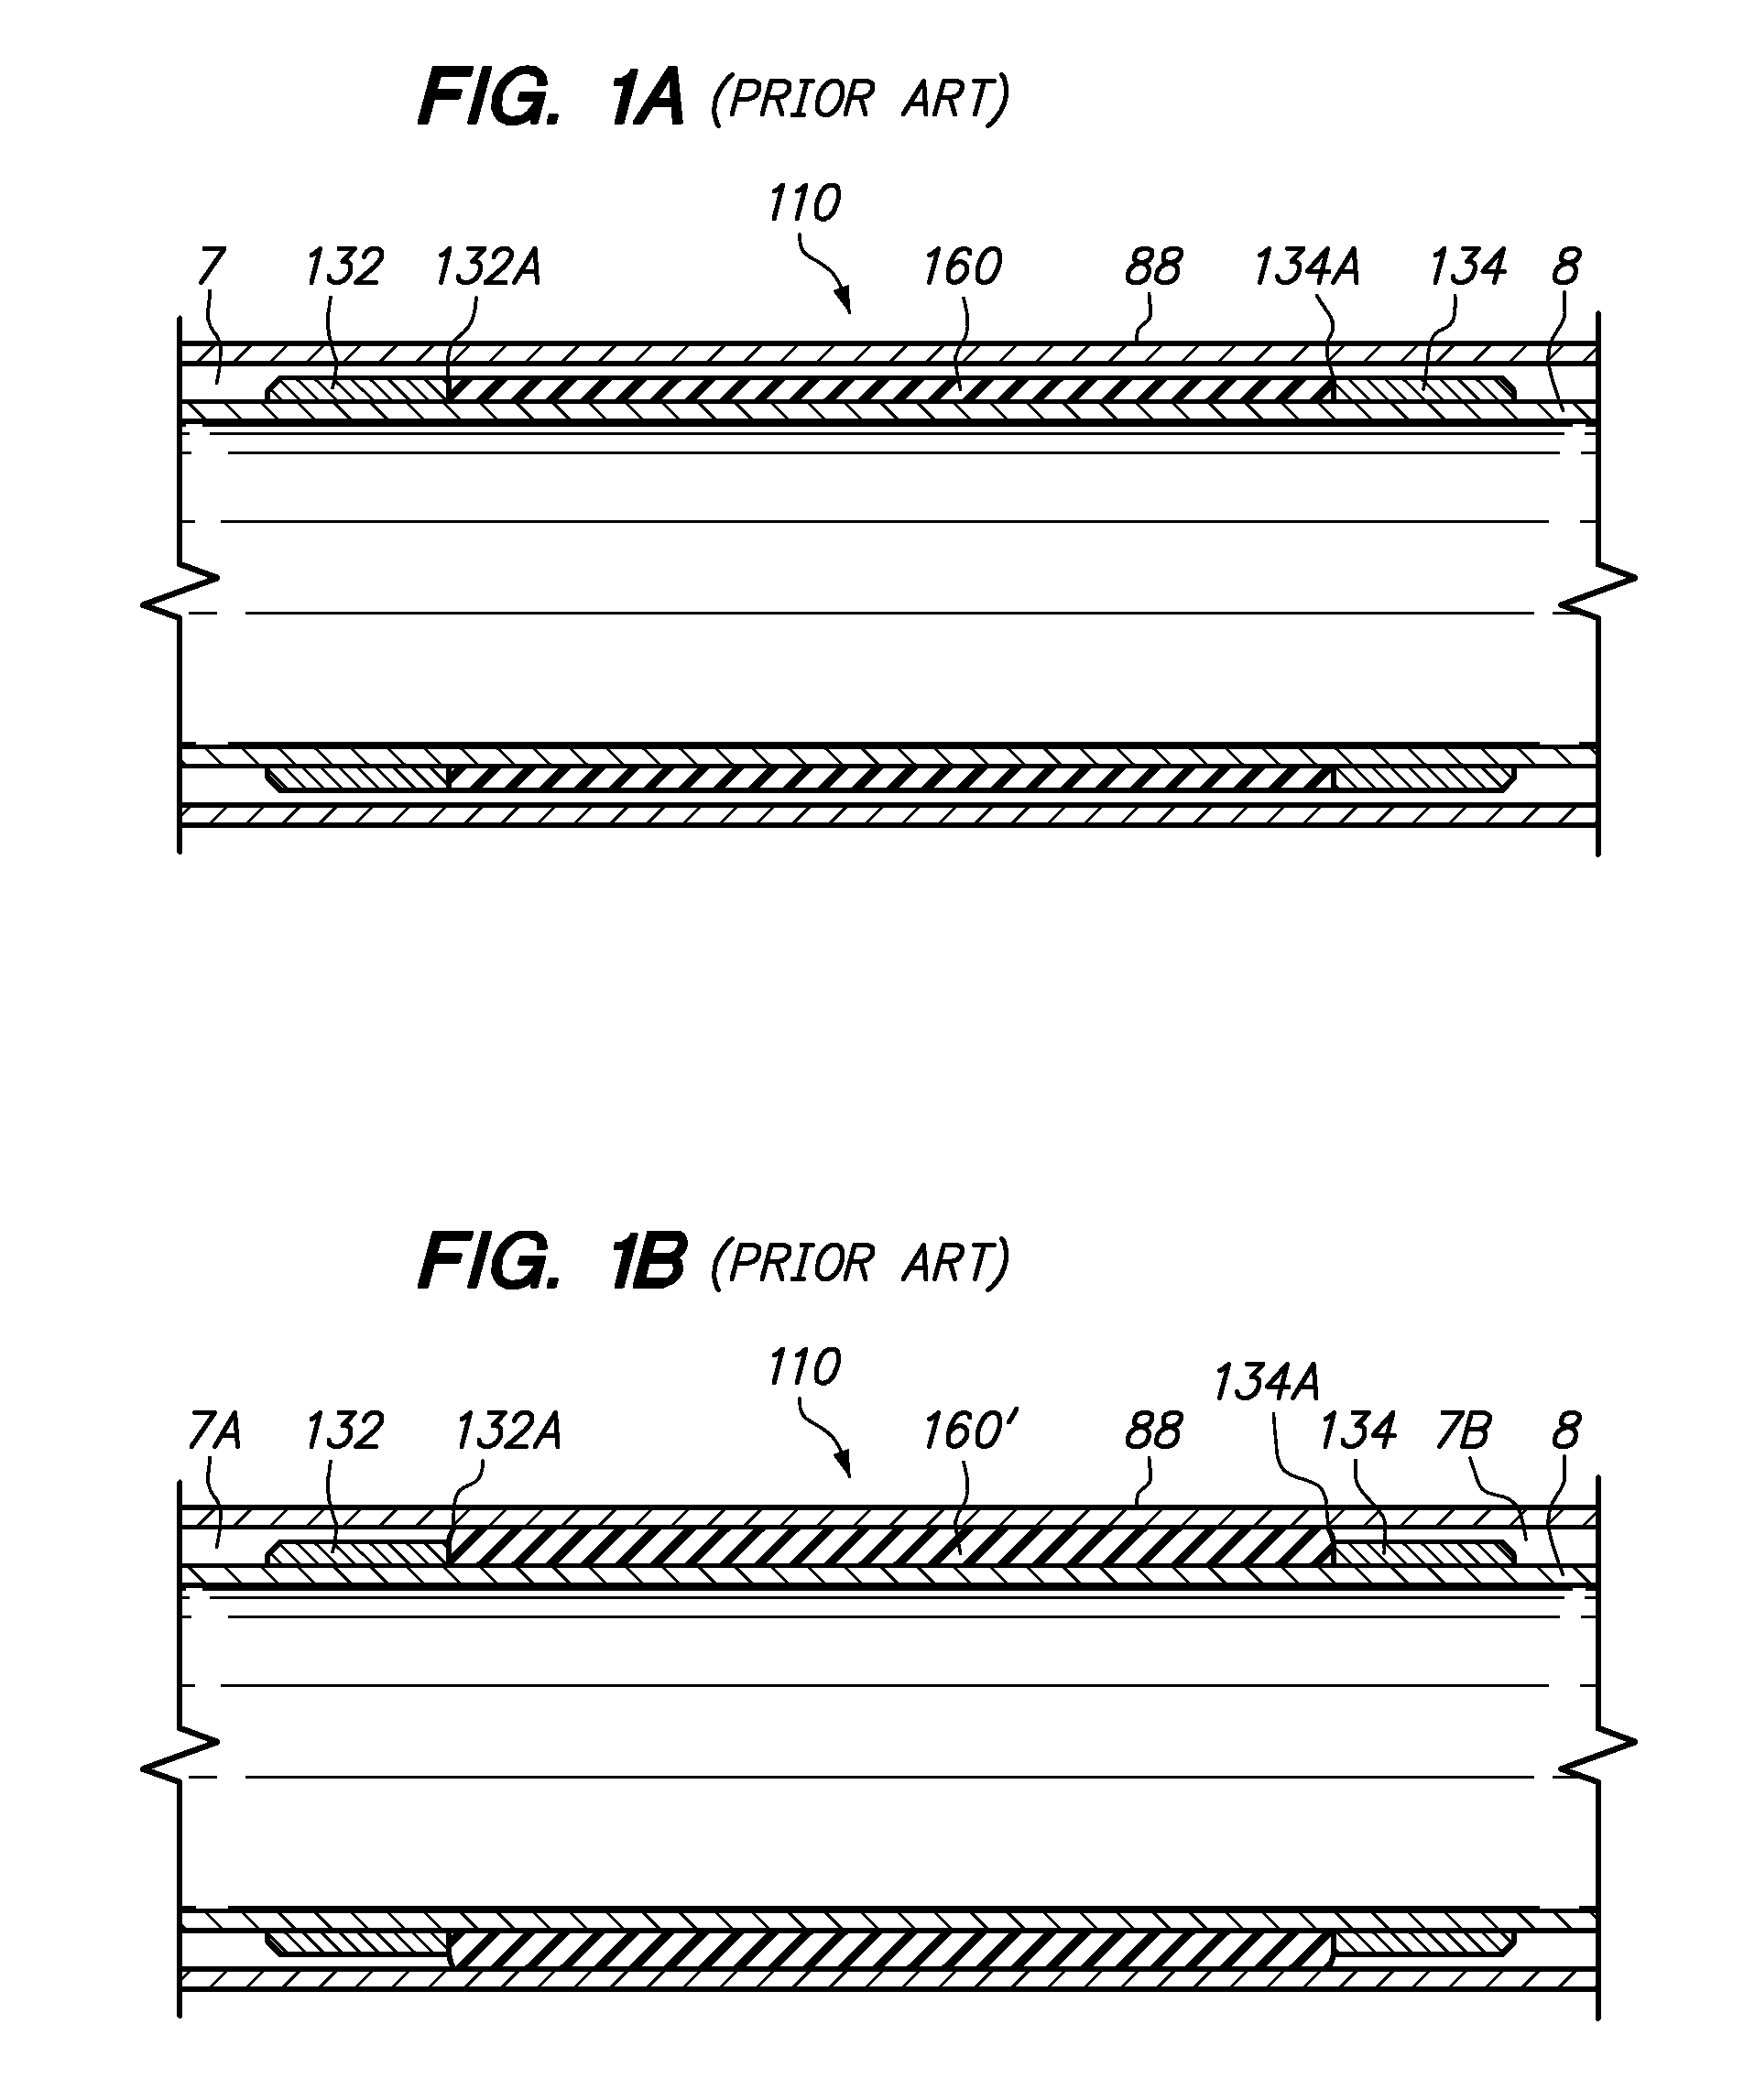 Interferece-fit stop collar and method of positioning a device on a tubular